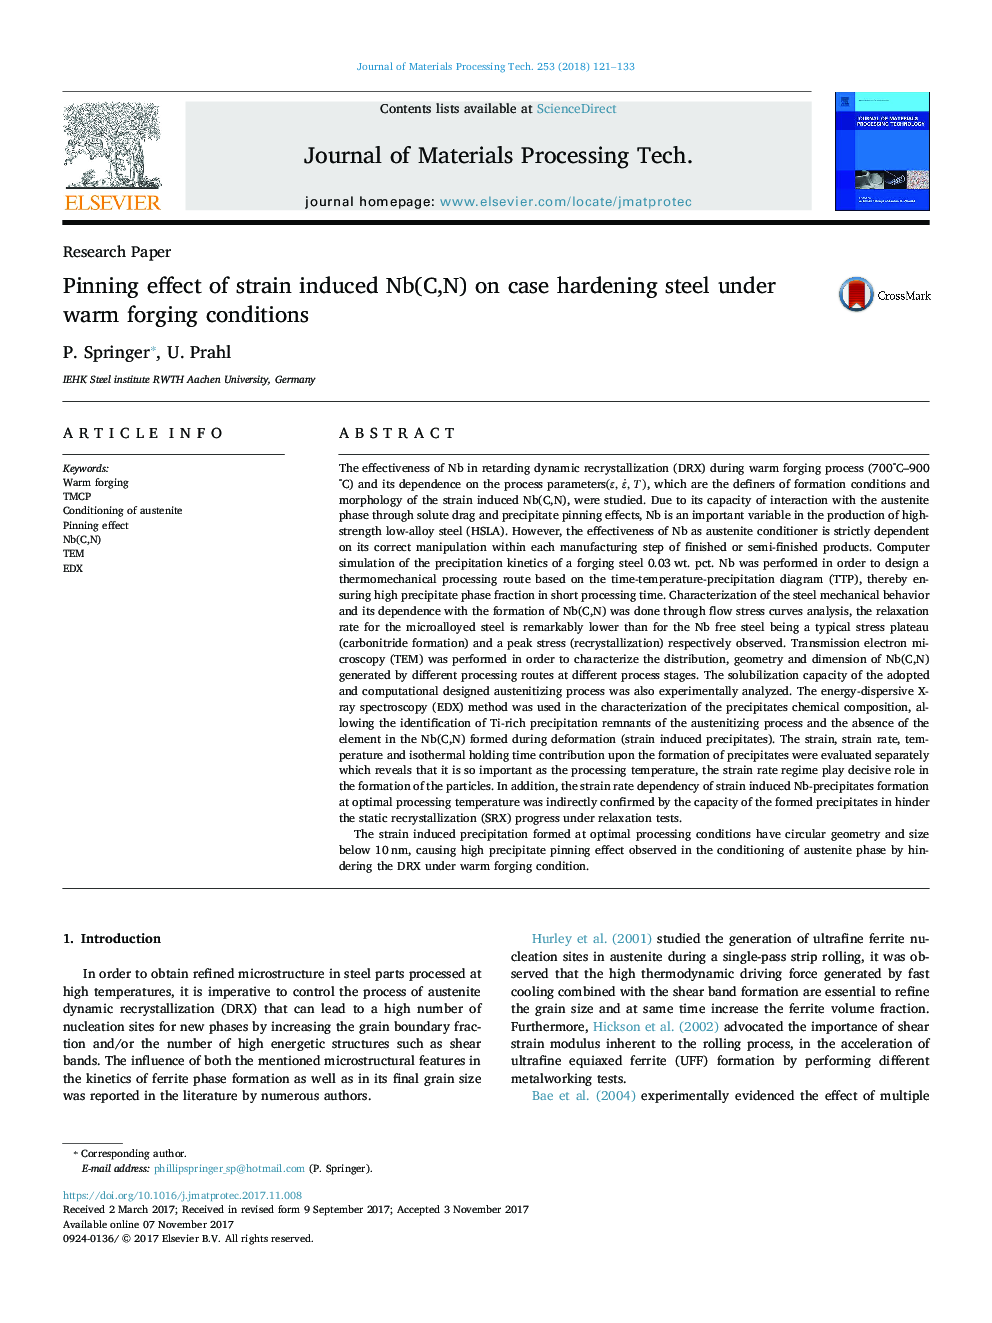 Pinning effect of strain induced Nb(C,N) on case hardening steel under warm forging conditions